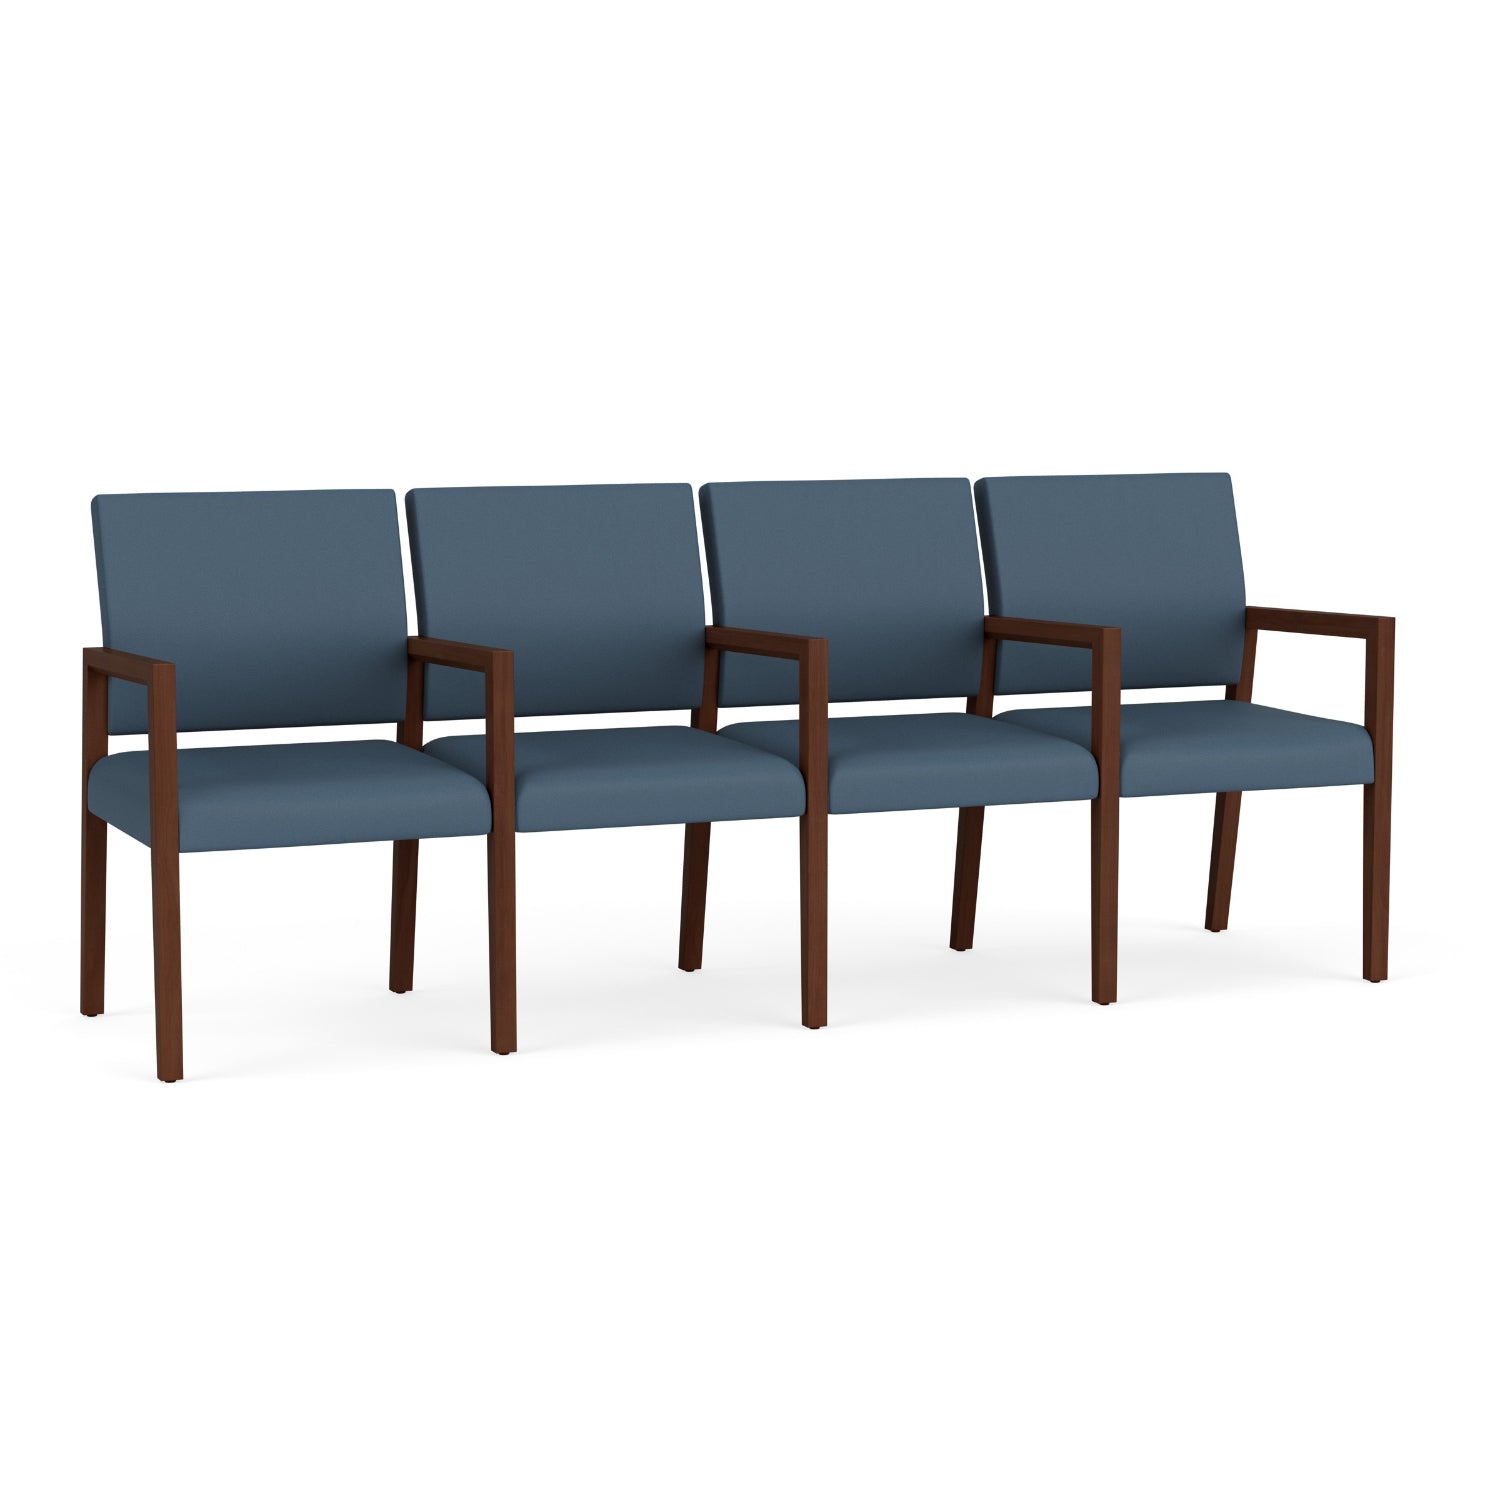 Brooklyn Collection Reception Seating, 4 Seats with Center Arms, Standard Vinyl Upholstery, FREE SHIPPING